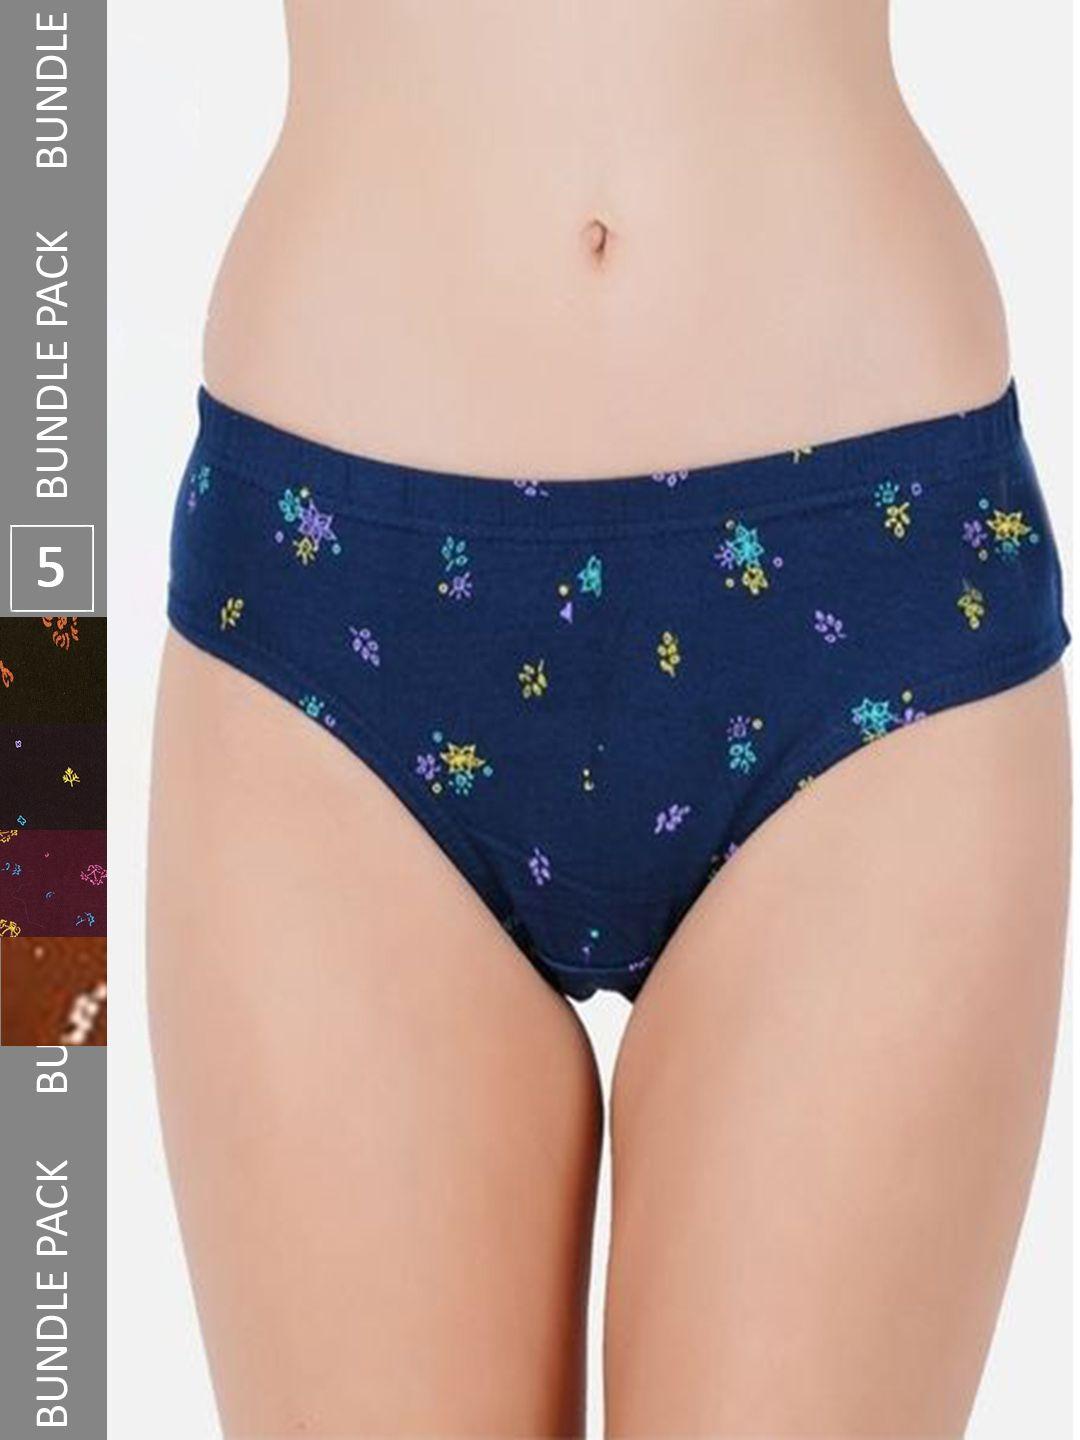 pride-apparel-women-pack-of-5-assorted-floral-printed-cotton-anti-microbial-hipster-briefs